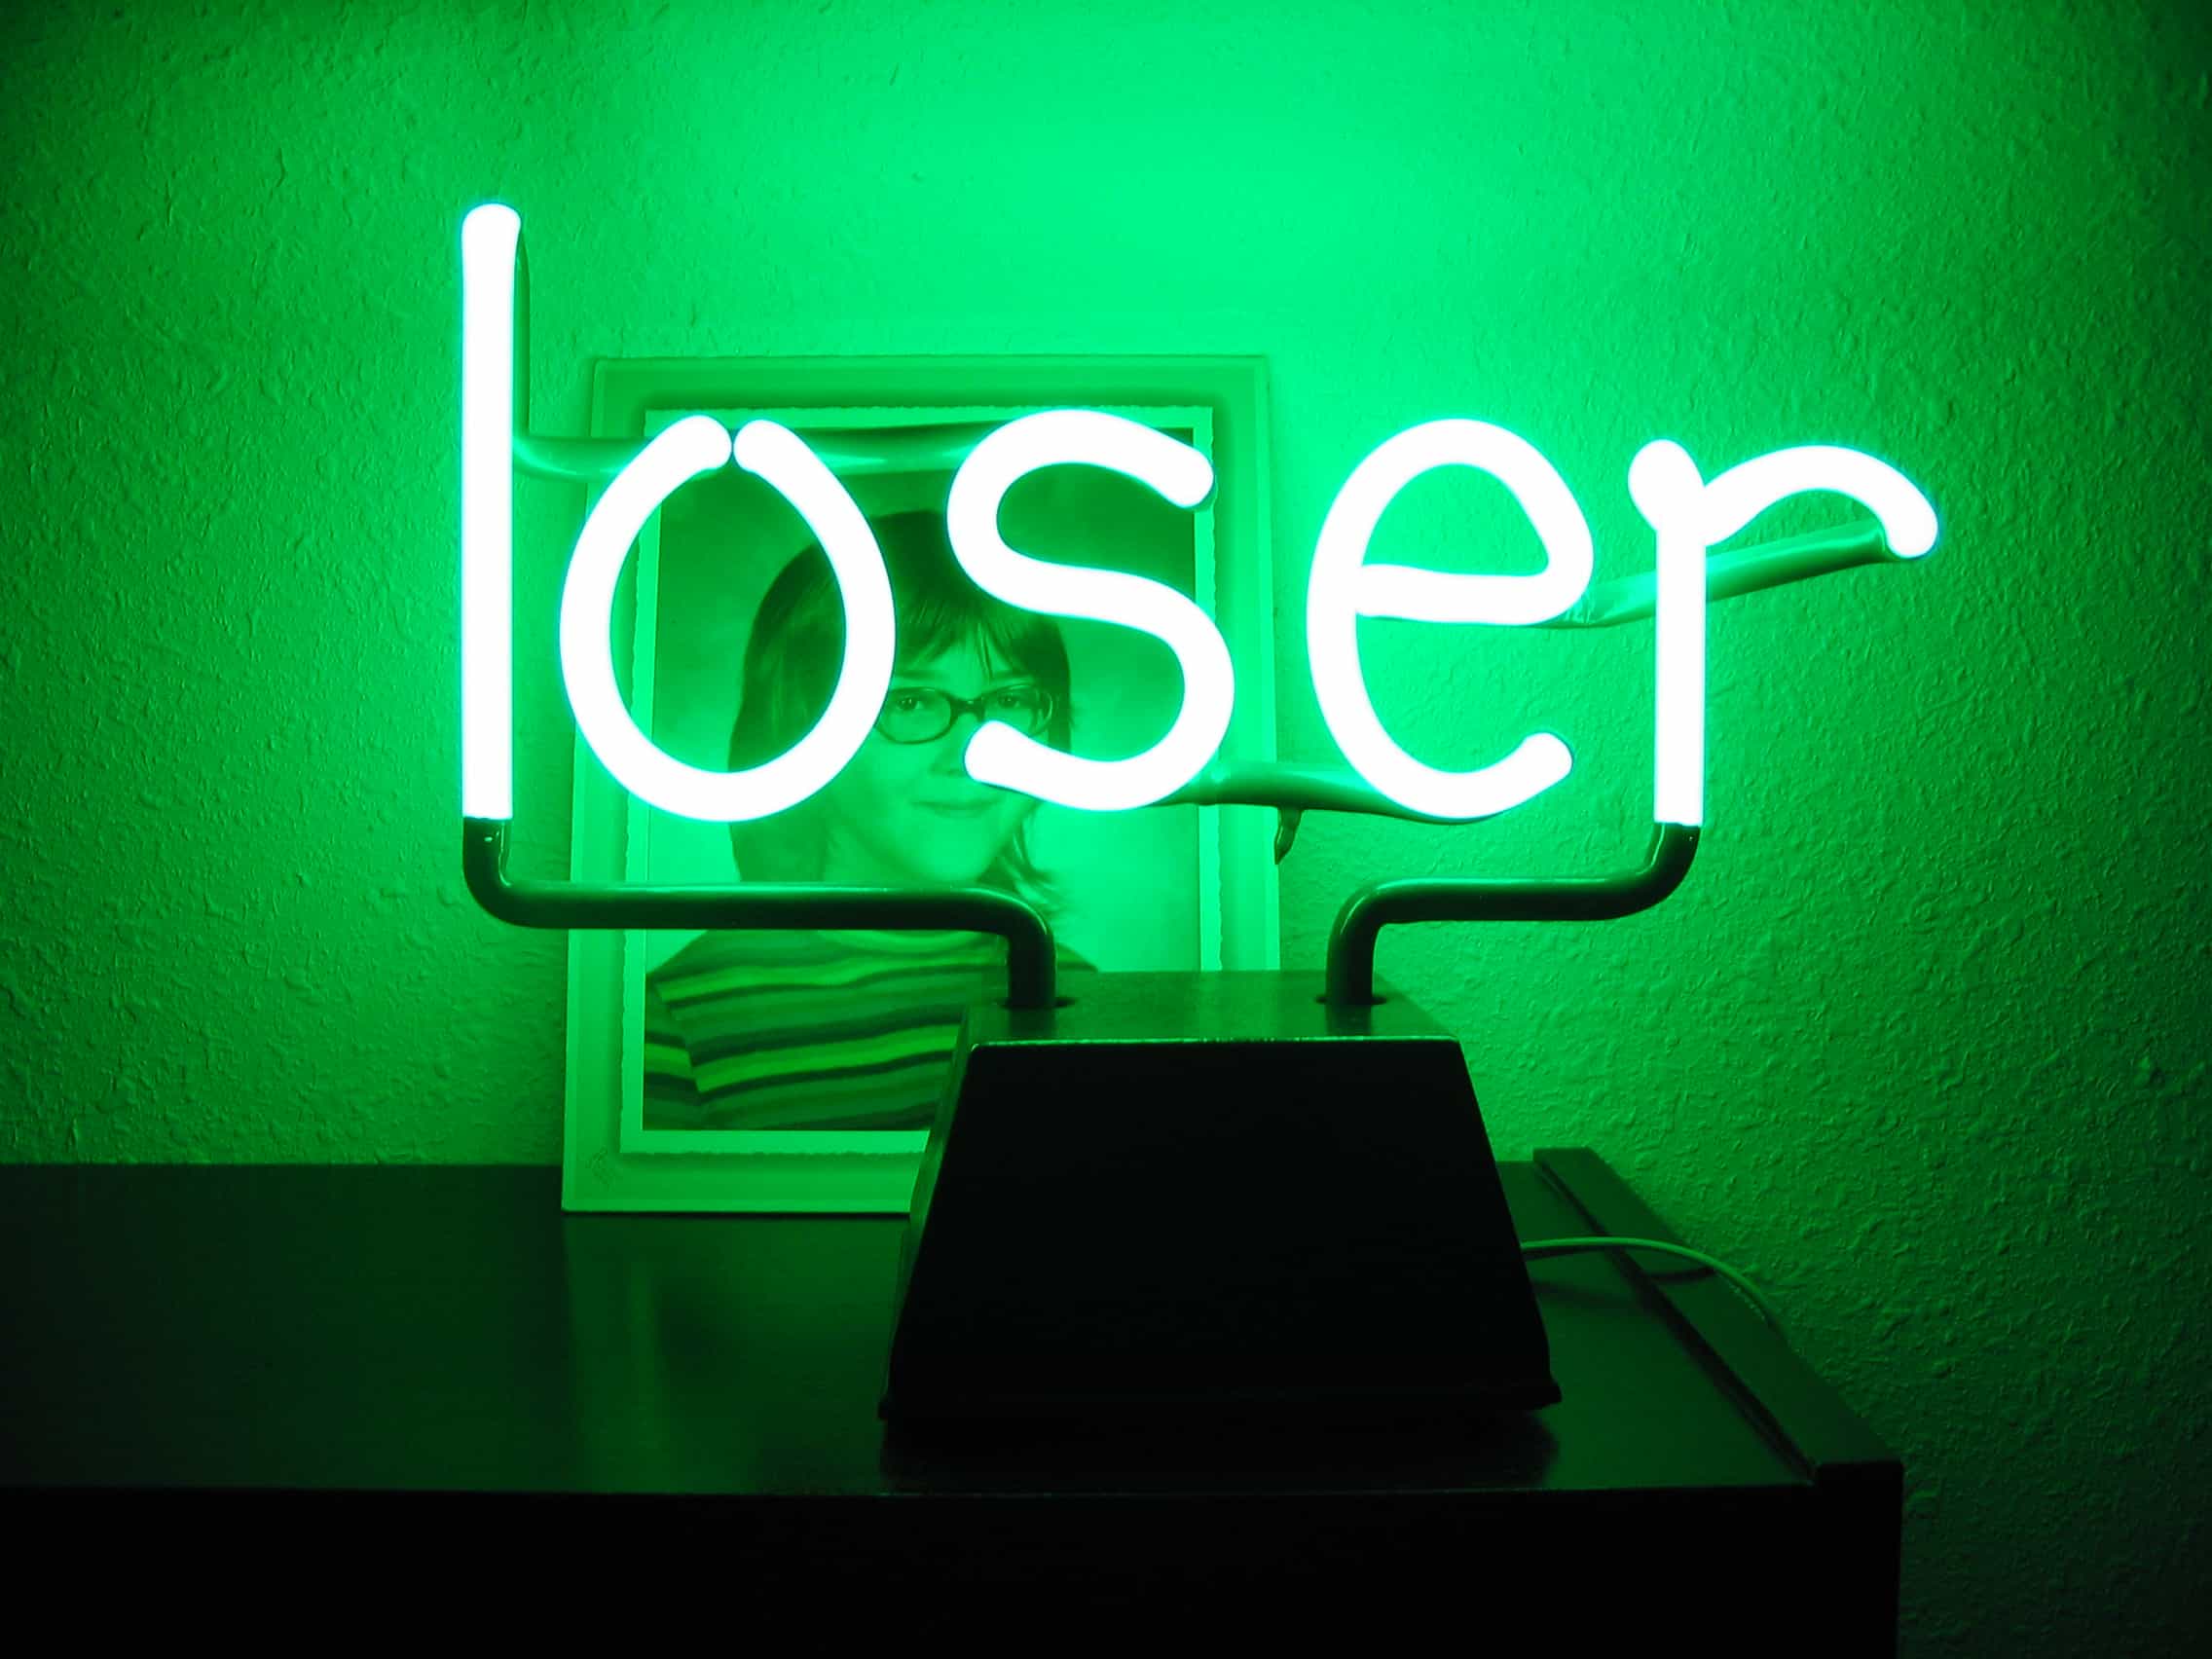 Are Your Social Shares Calling You a Loser?